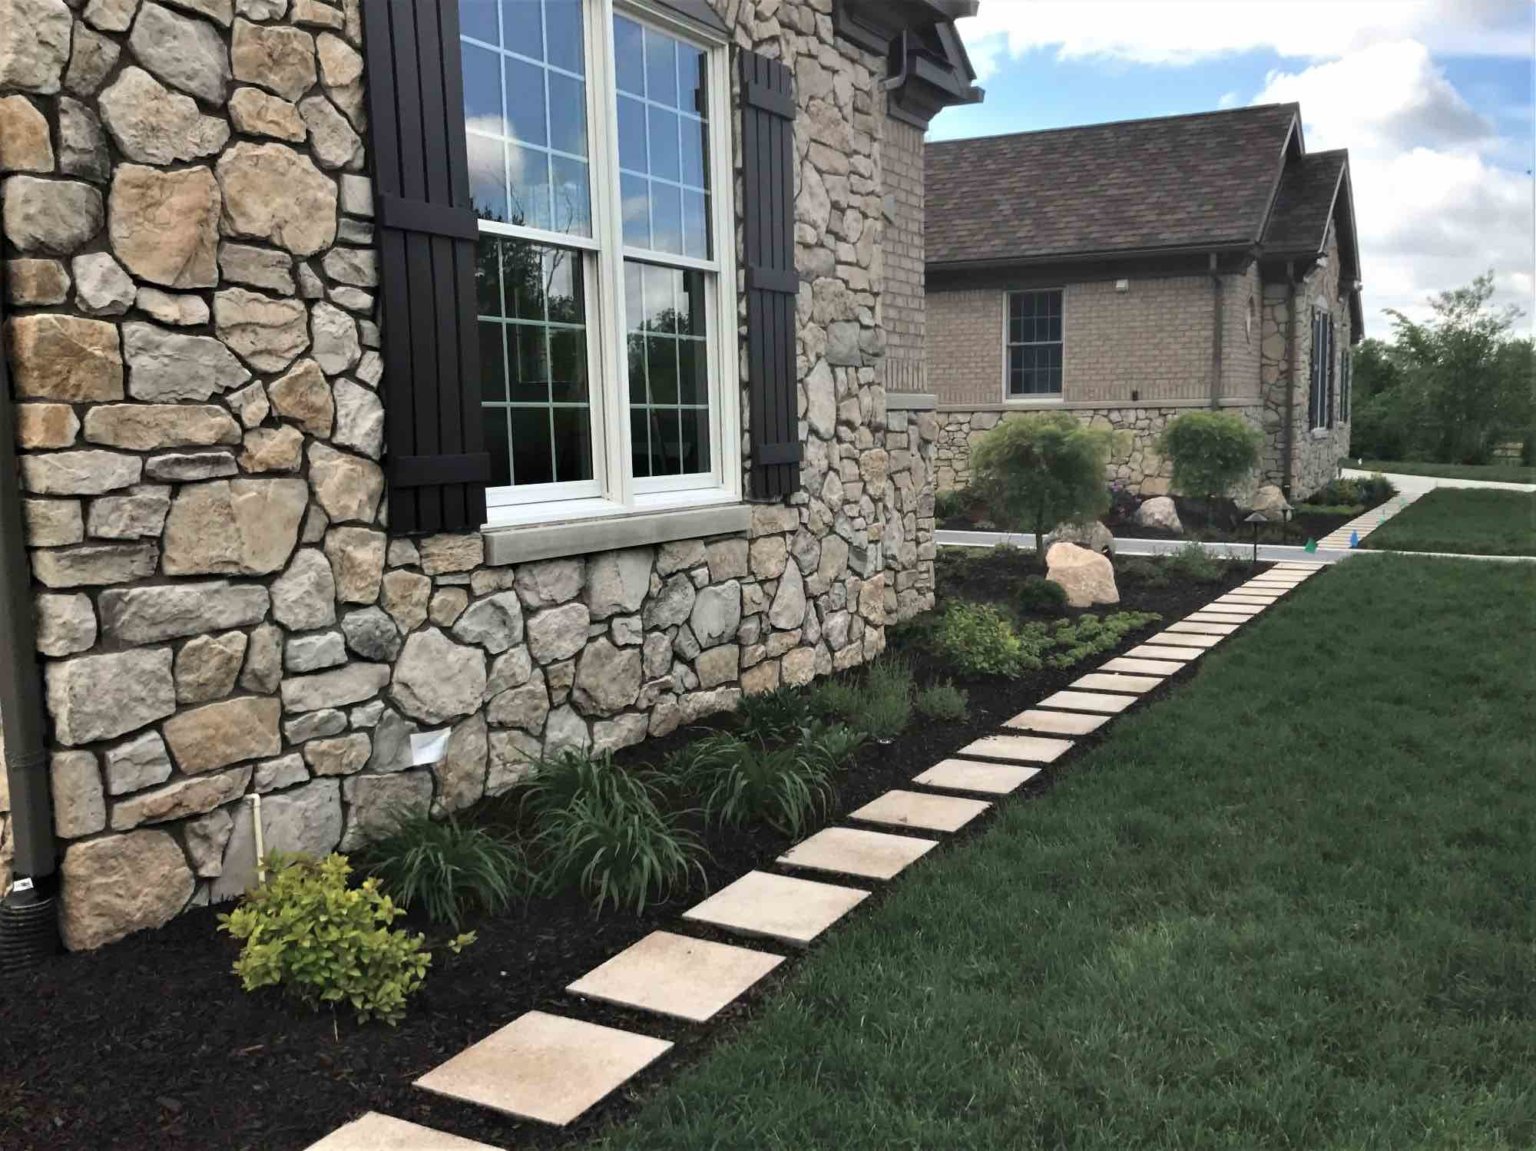 Front yard pavers Michigan Michigan front yard landscaping with pavers Front yard paving stones in Michigan Front yard hardscape design Michigan Michigan front yard patio pavers Front yard walkway pavers Michigan Front yard paver installation in Michigan